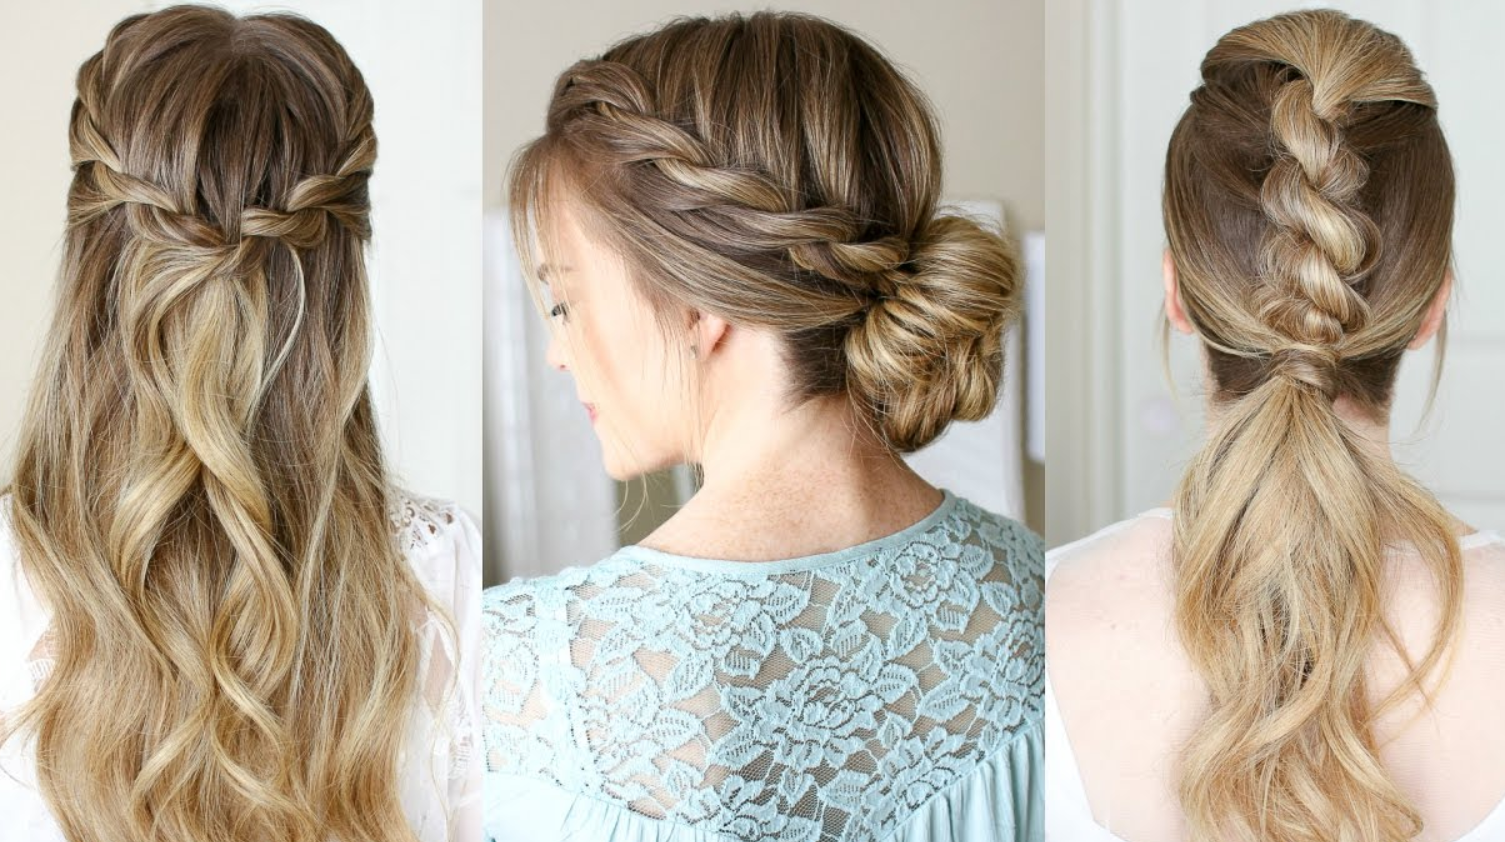 How to Make Simple Hairstyles for Everyday?